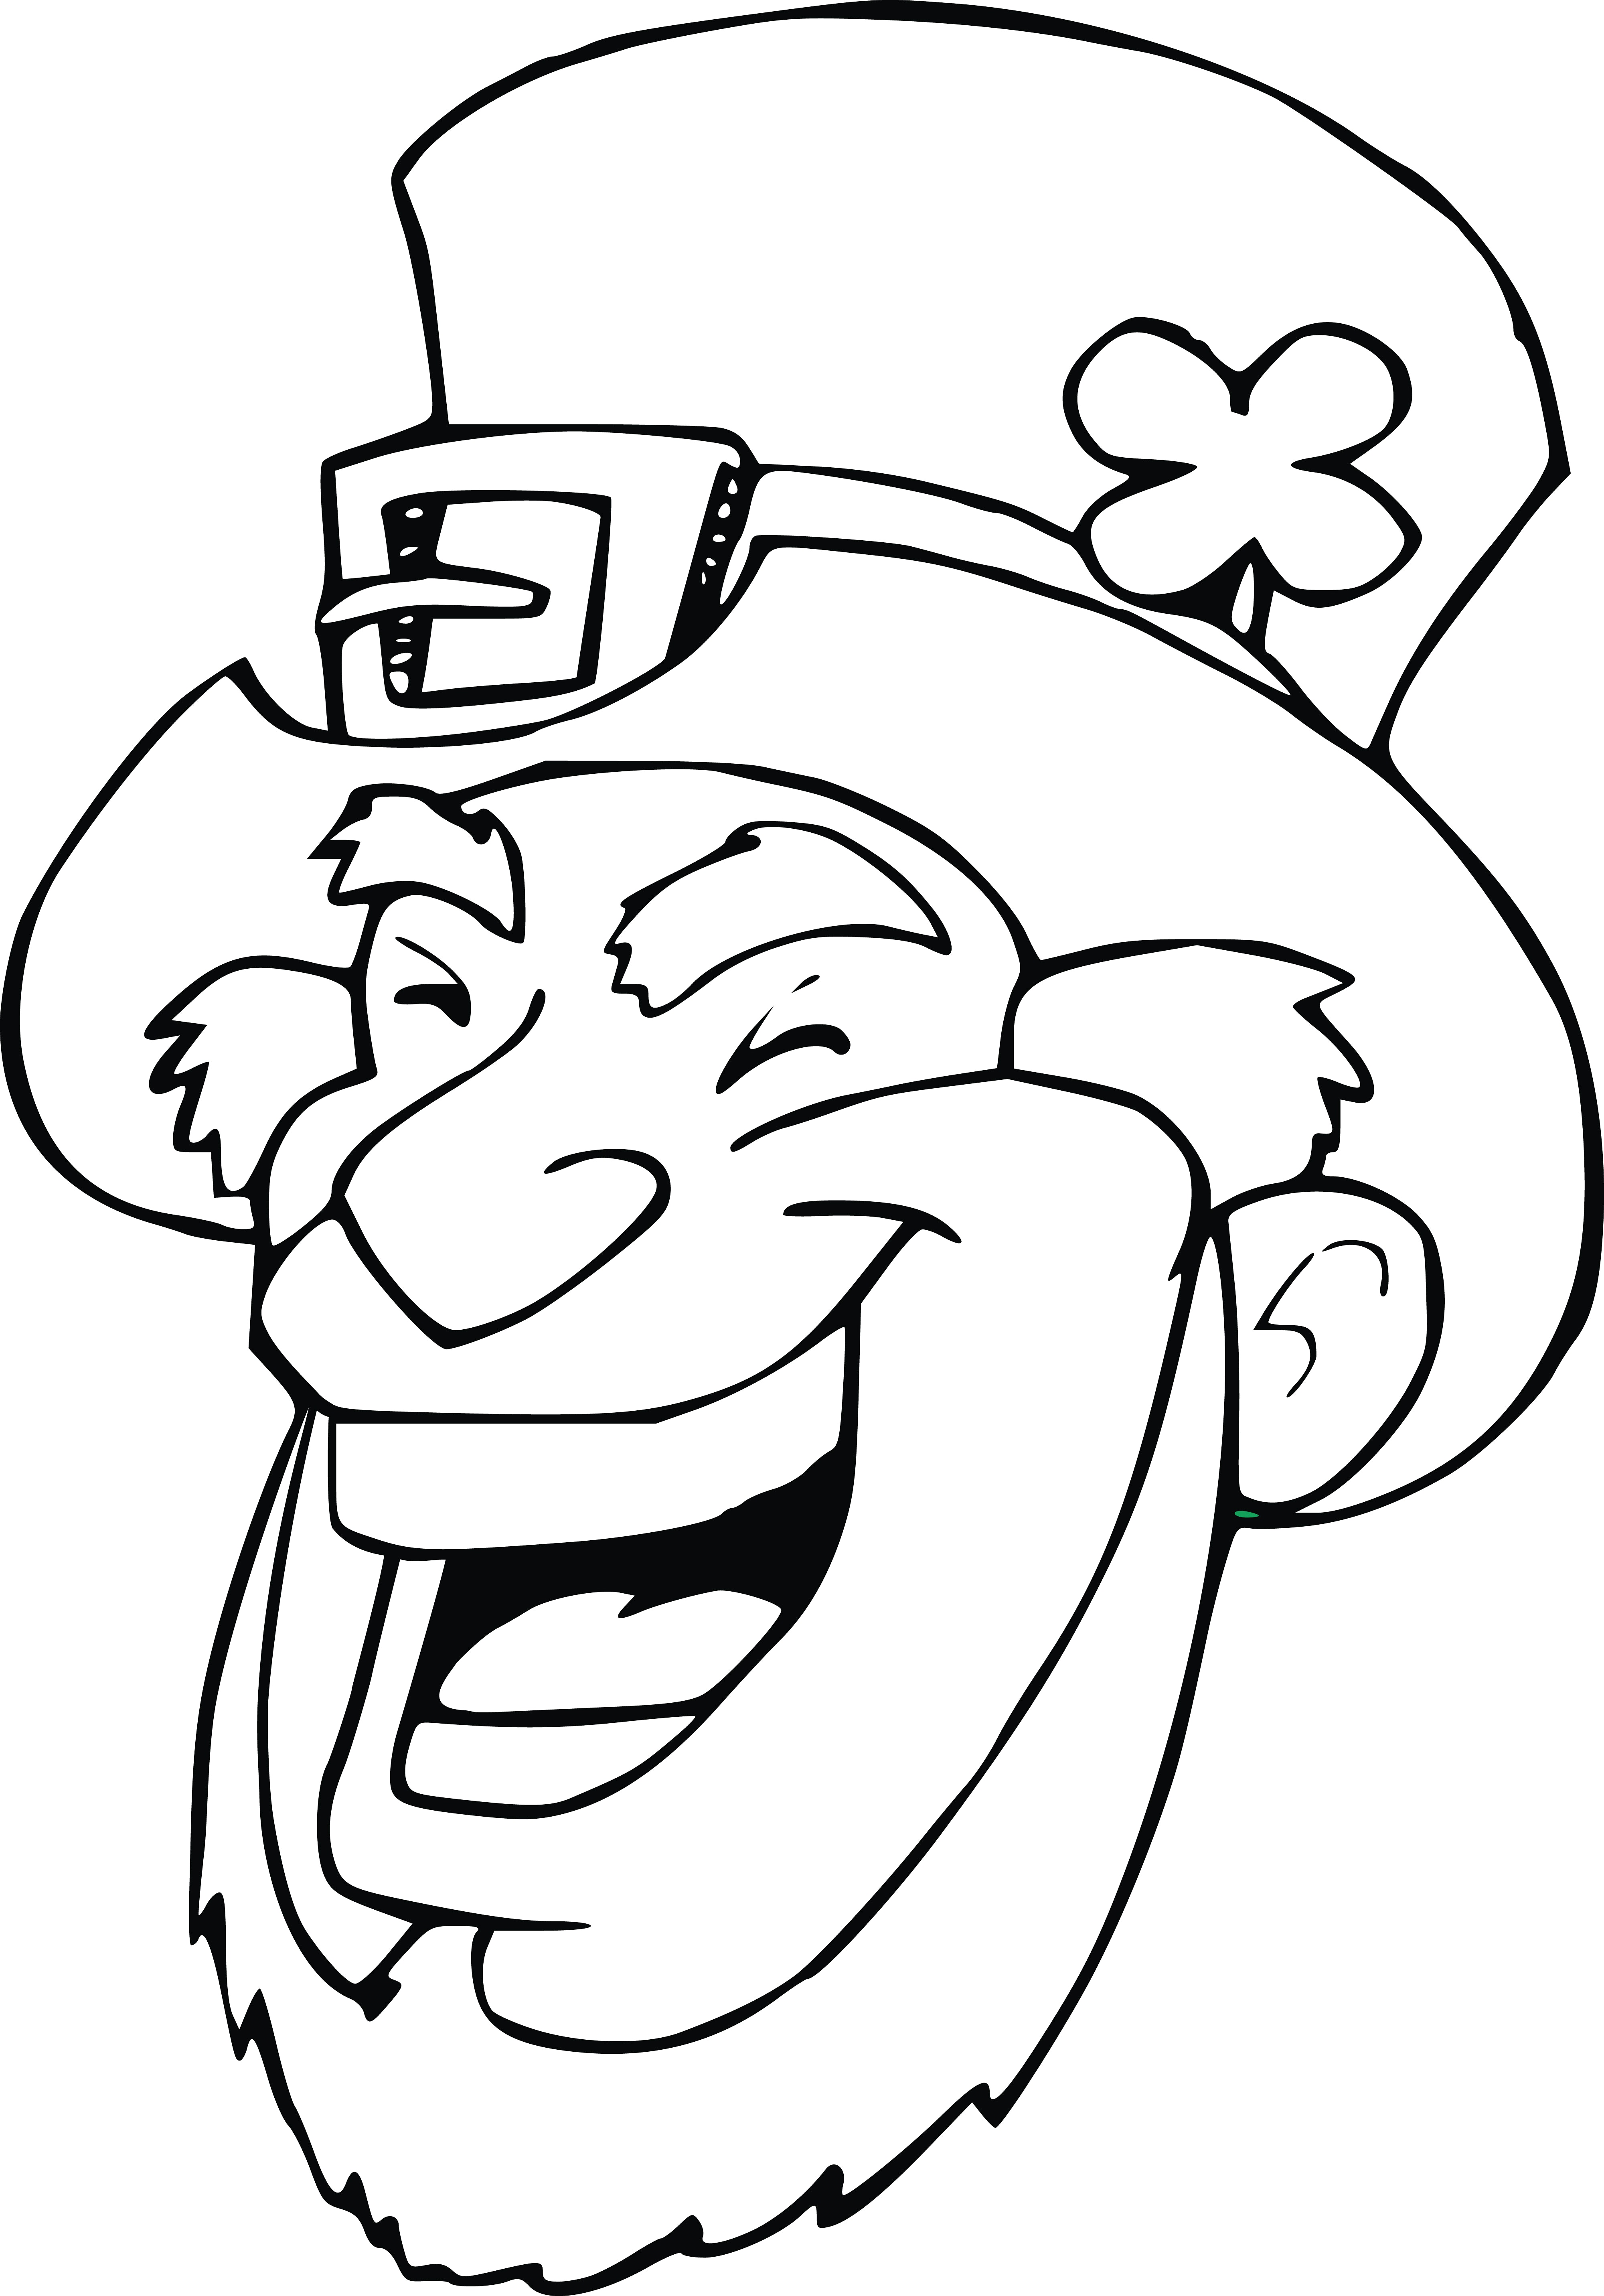 leprechaun-face-coloring-pages-at-getcolorings-free-printable